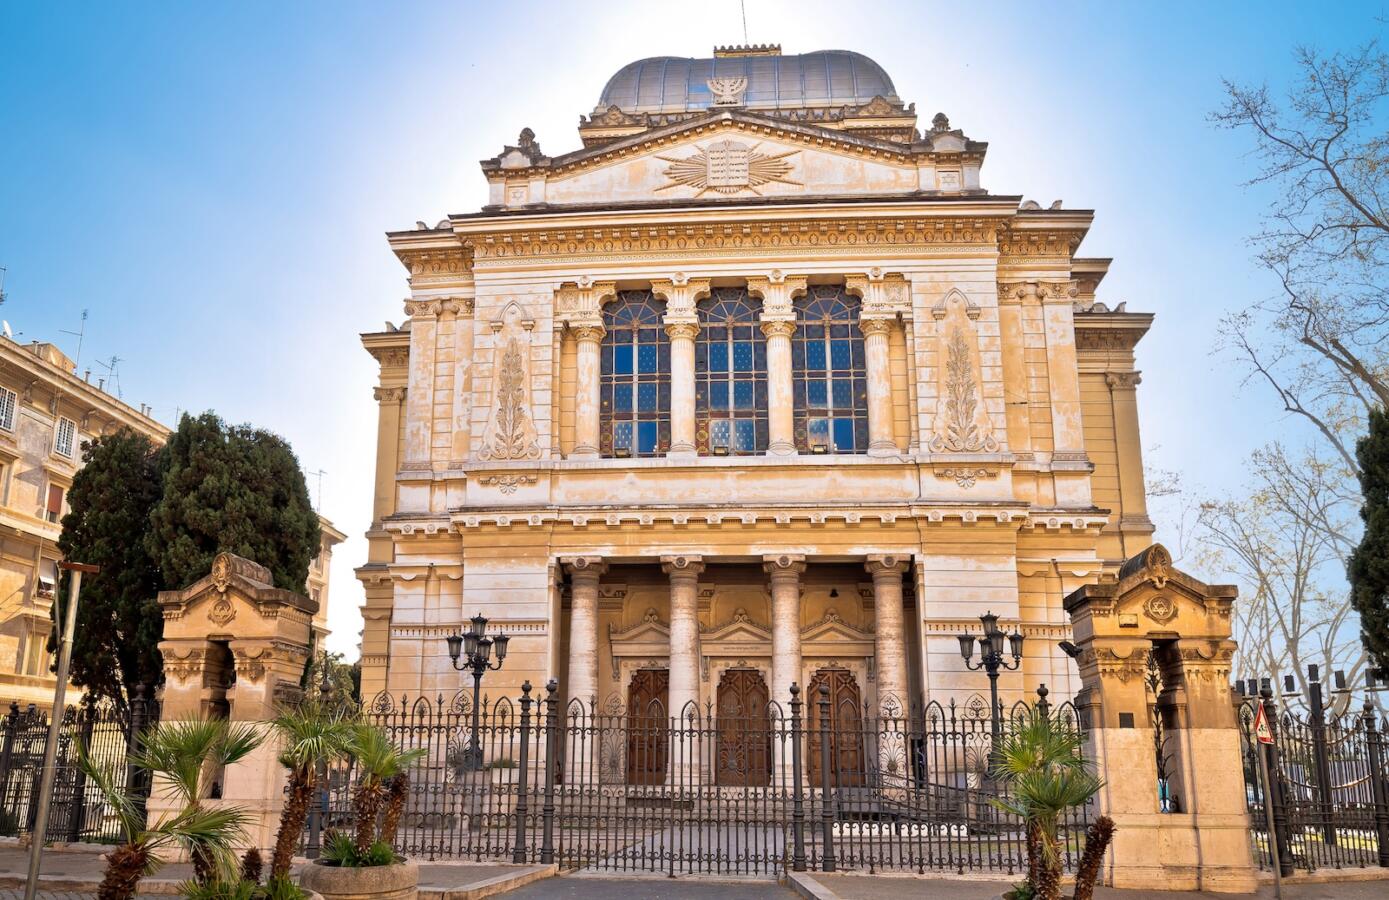 Rome. Great Synagogue of Rome facade view, Jewish temple in eternal city